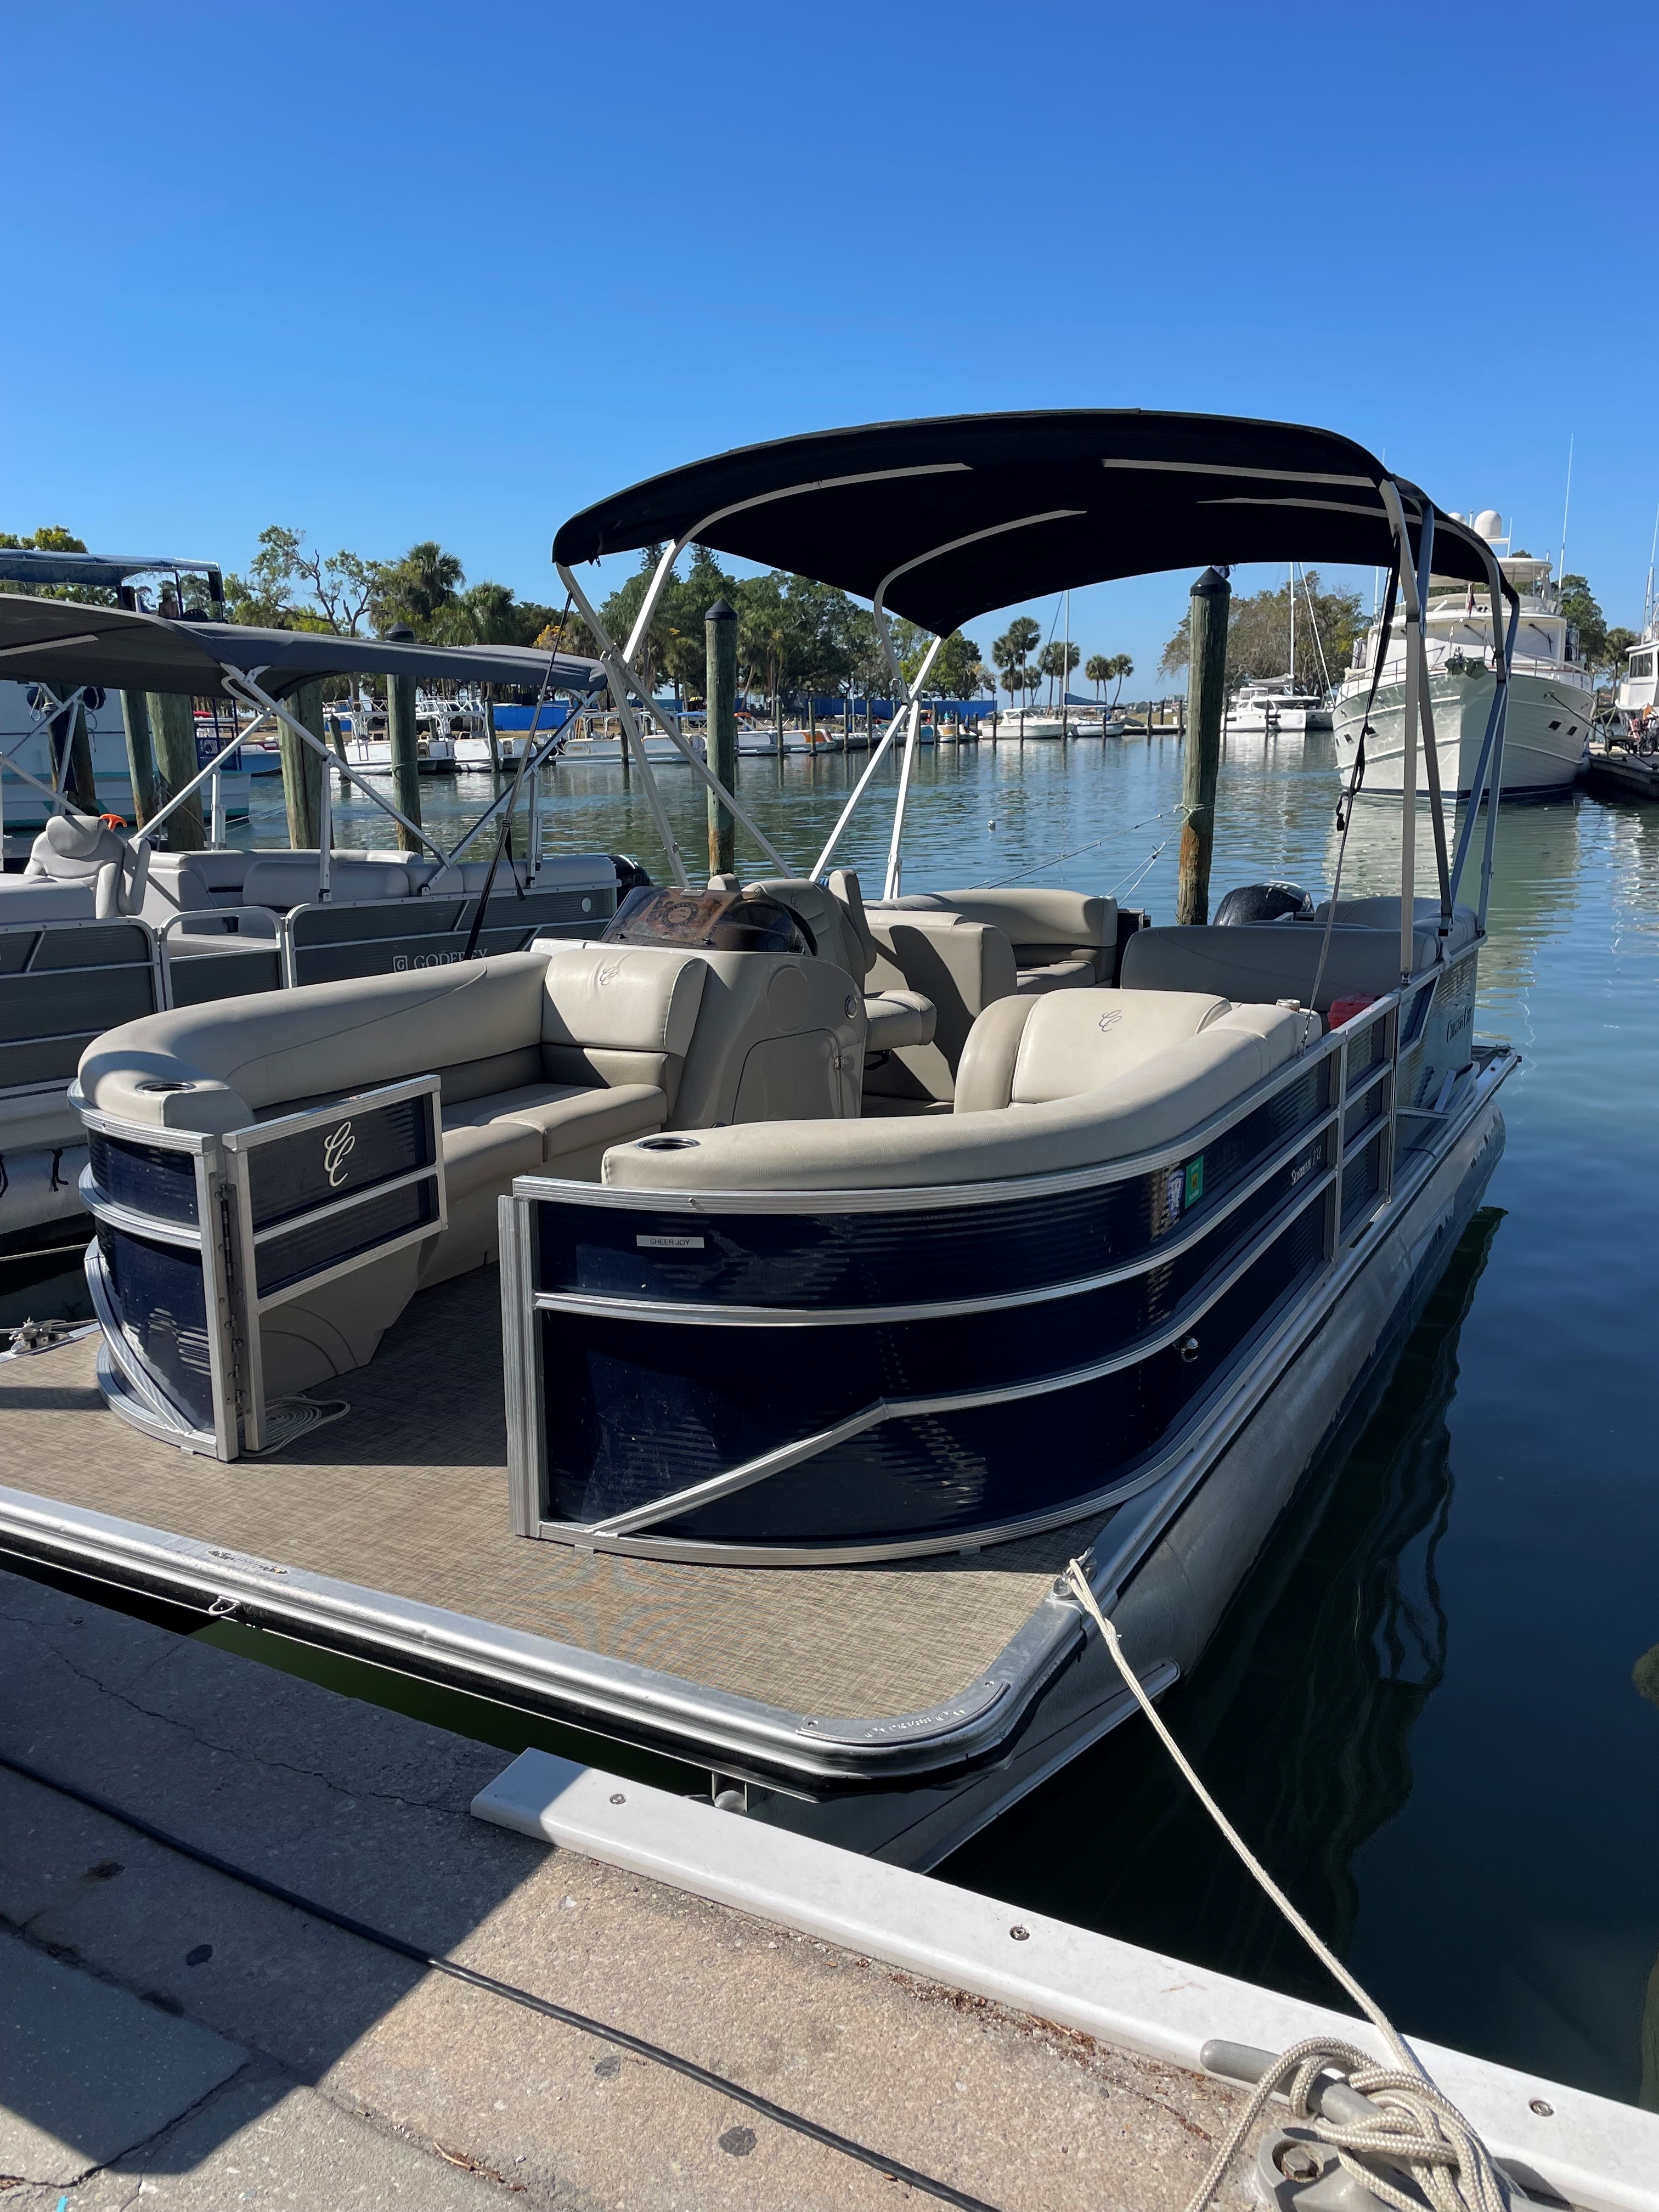 WEST SIDE STORMY (22 FT Pontoon 115 HP - Fishing or Cruising)